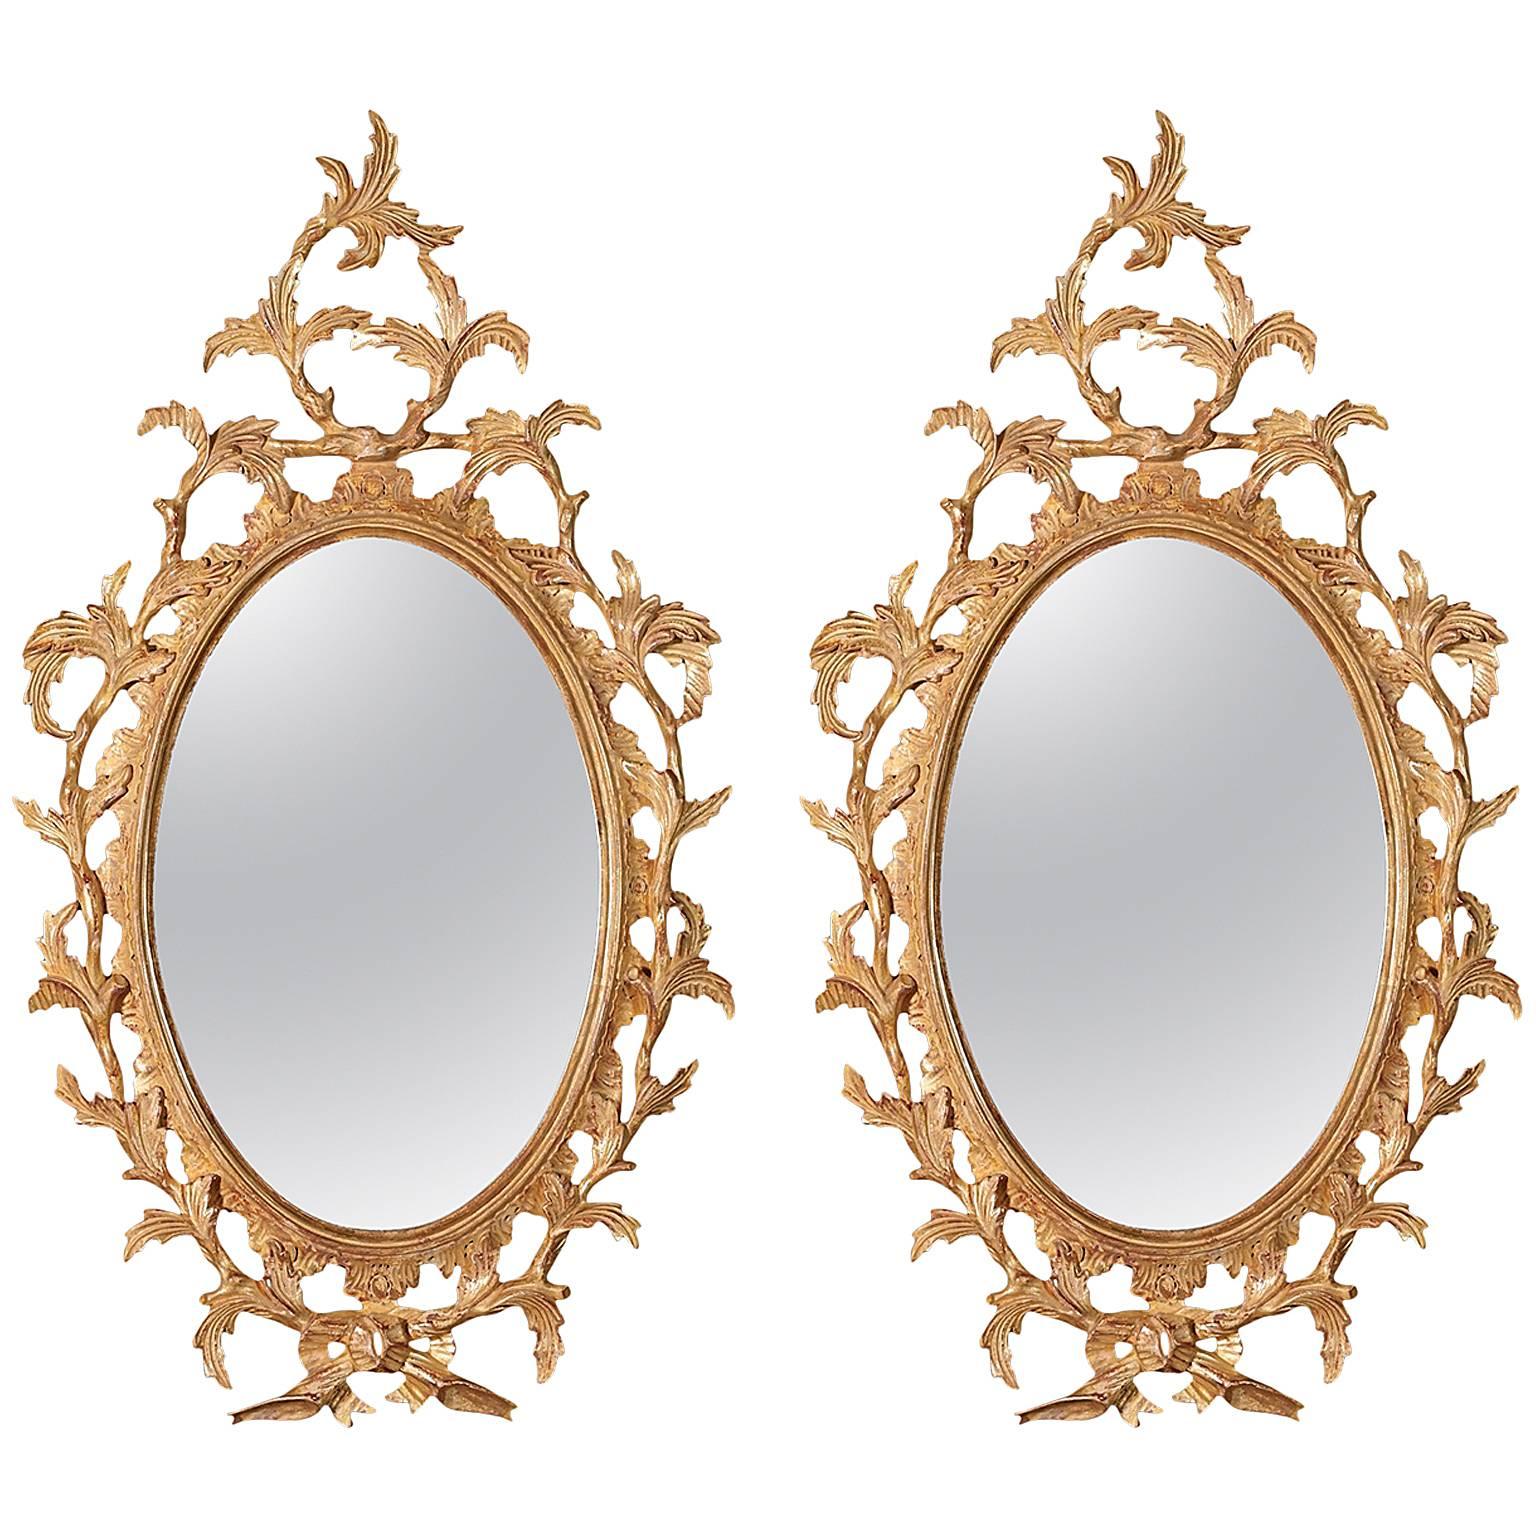 Pair of Small Chippendale Oval Mirrors in the manner of Thomas Chippendale For Sale